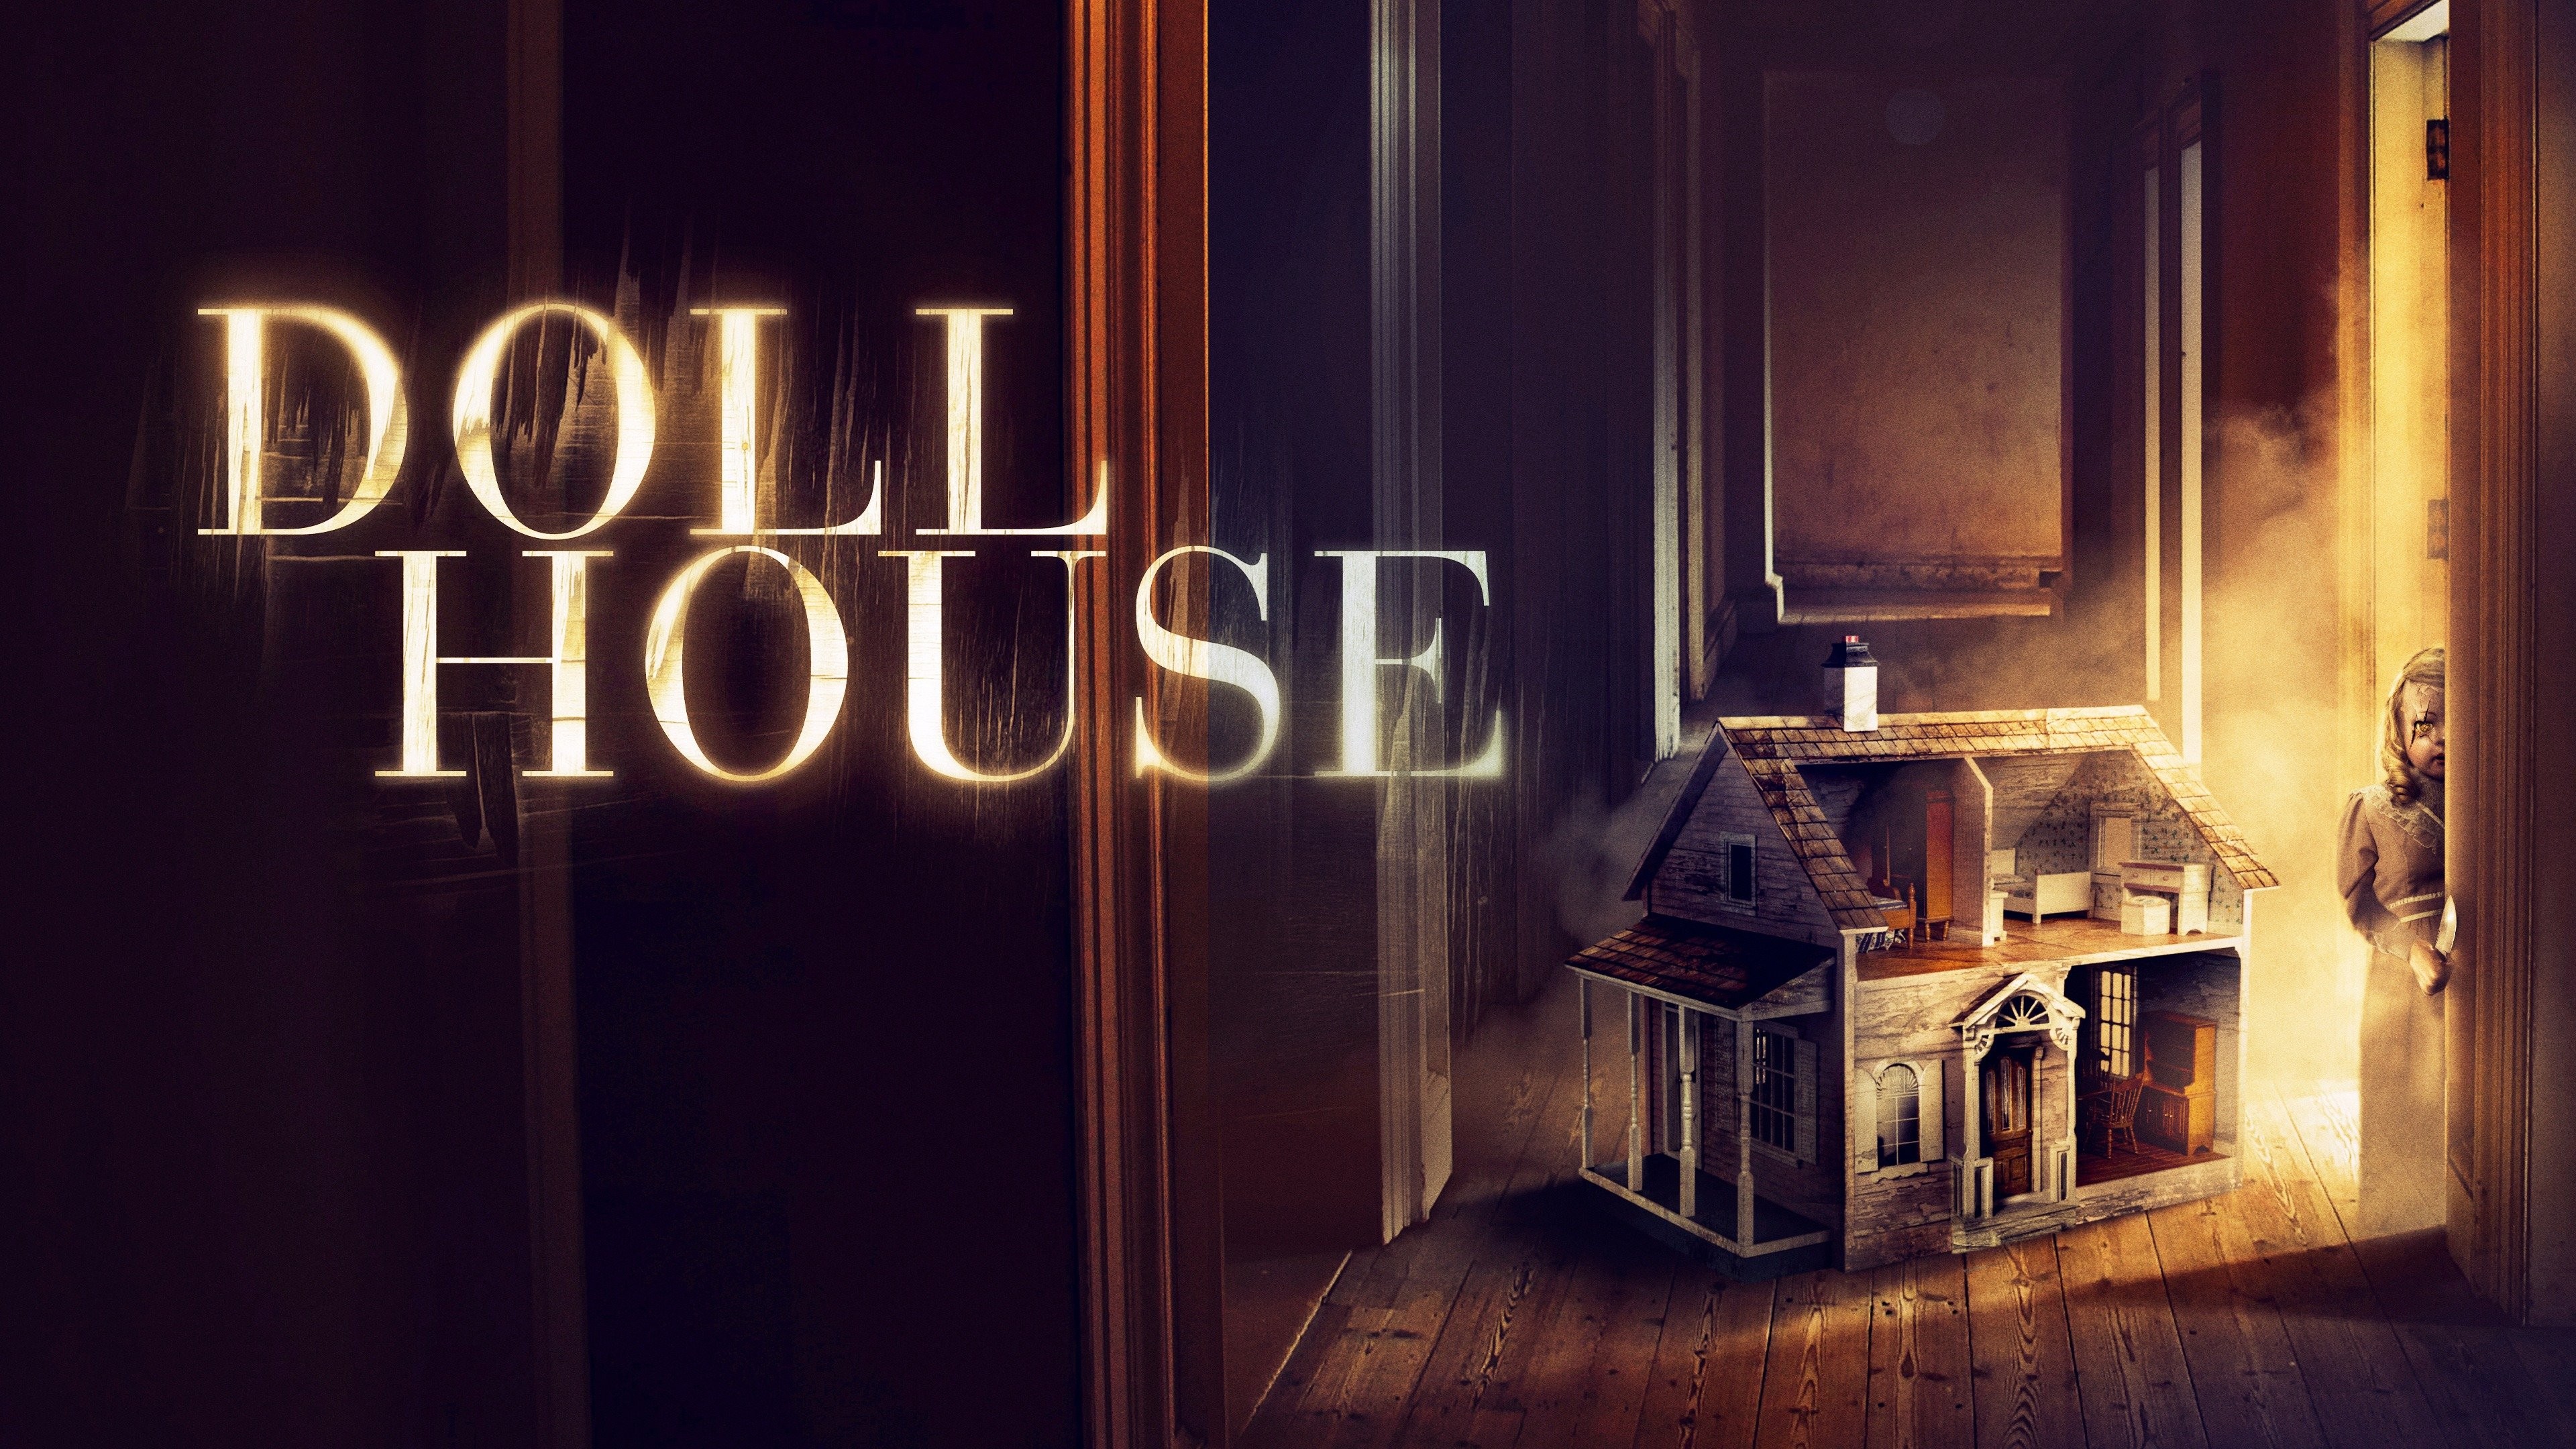 Doll House Movie Streaming Online Watch